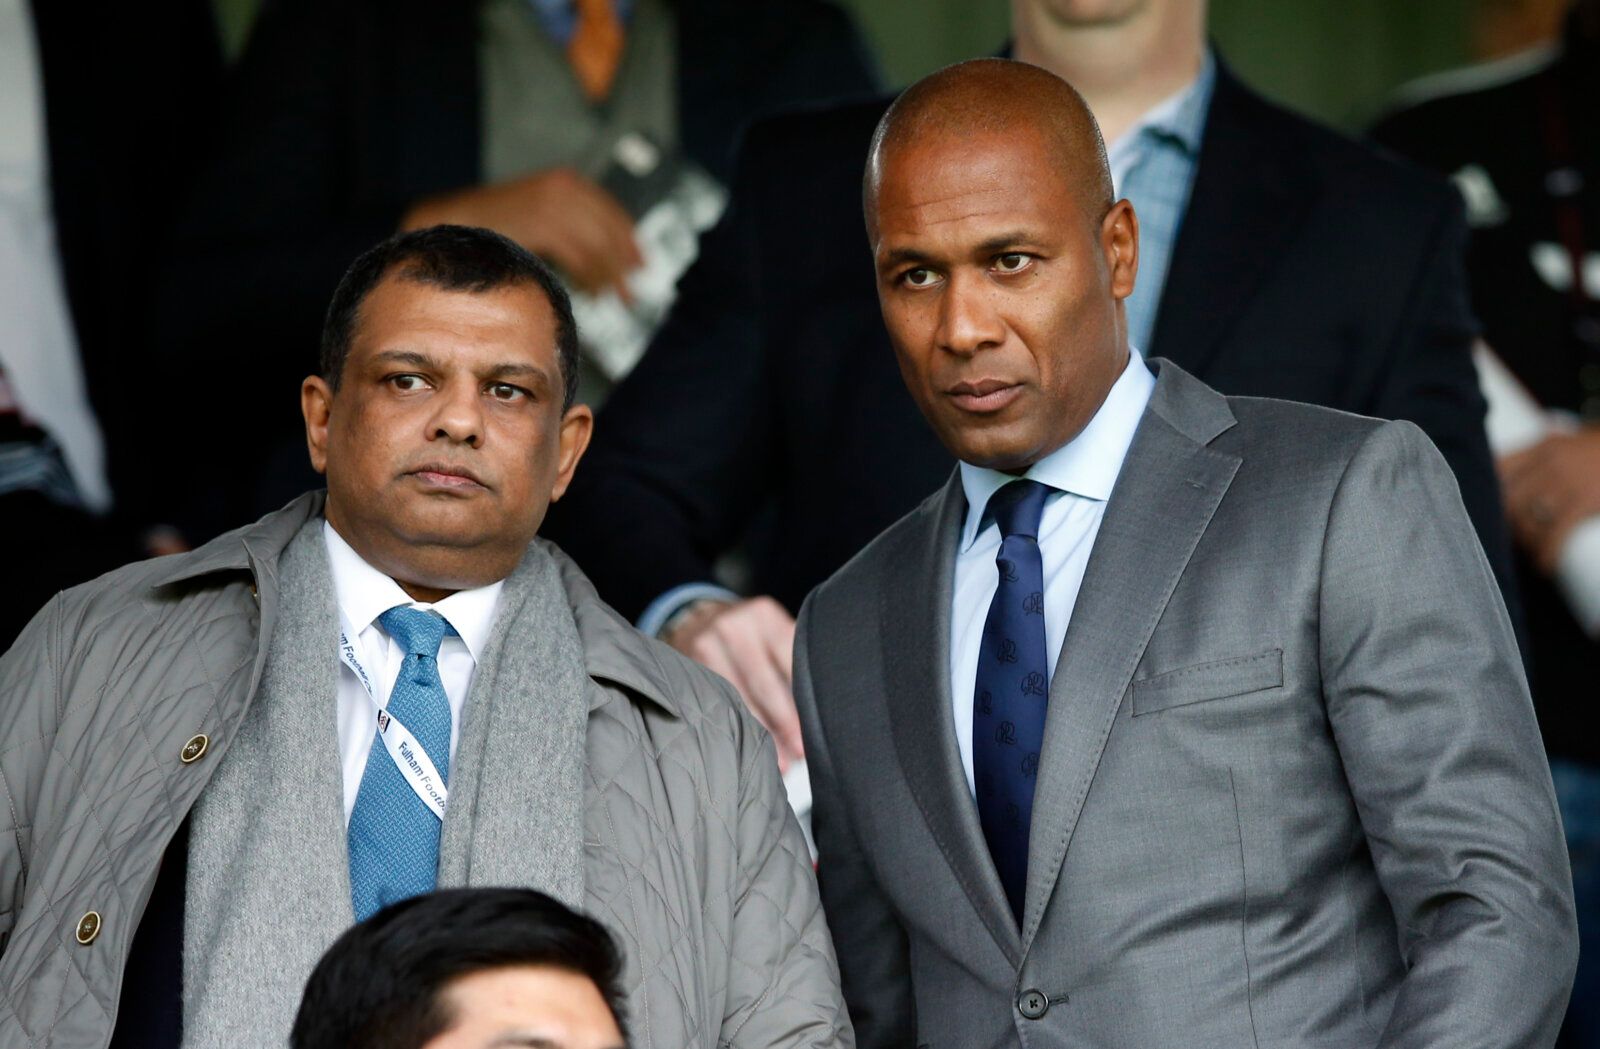 Britain Soccer Football - Fulham v Queens Park Rangers - Sky Bet Championship - Craven Cottage - 16/17 - 1/10/16
QPR owner Tony Fernandes and director of football Les Ferdinand in the stands
Mandatory Credit: Action Images / Matthew Childs

EDITORIAL USE ONLY.